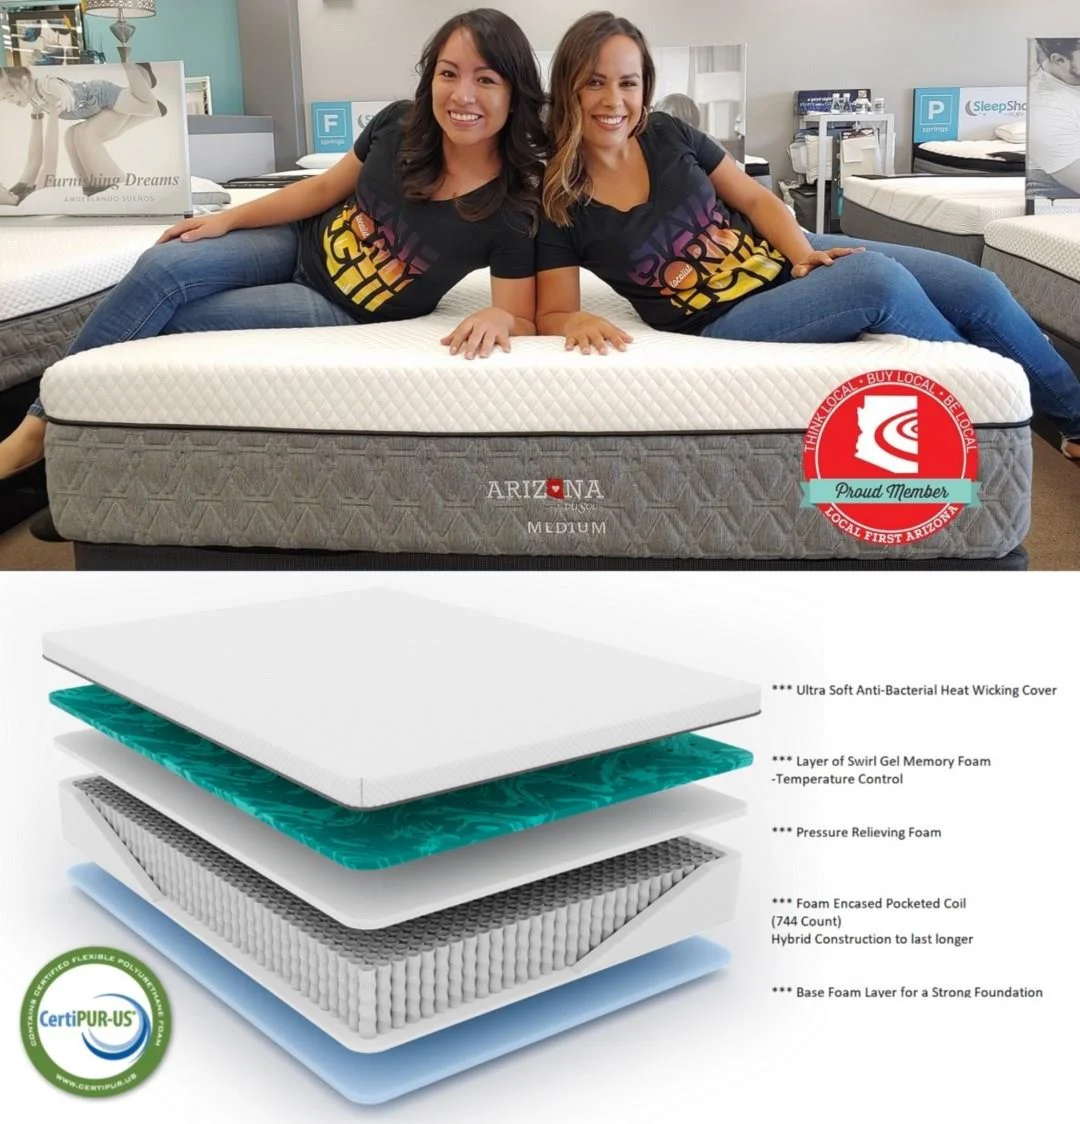 The Mattress that Supports YOU and ARIZONA!